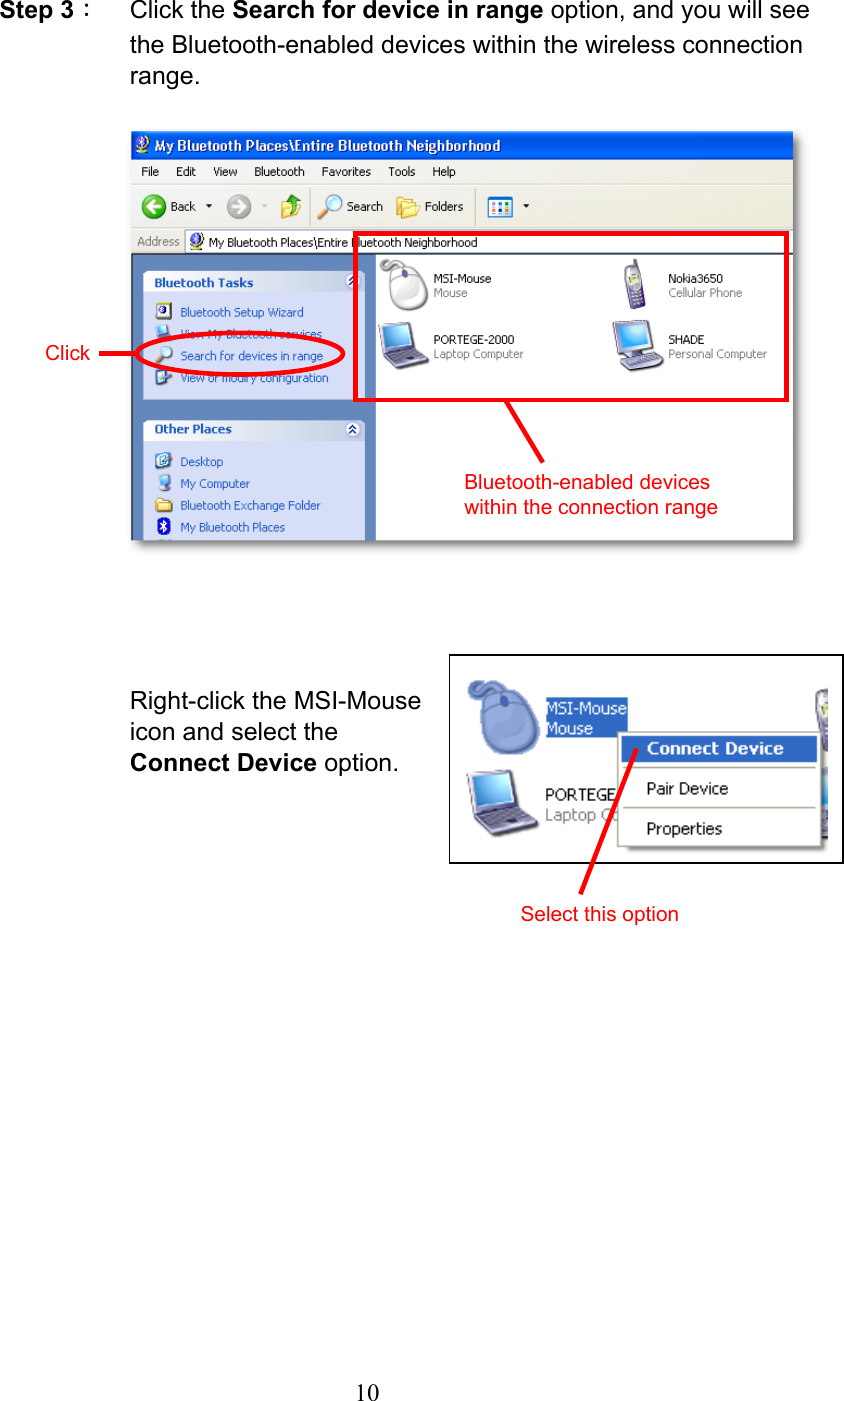  10 Step 3： Click the Search for device in range option, and you will see the Bluetooth-enabled devices within the wireless connection range.                      Right-click the MSI-Mouse icon and select the   Connect Device option.    ClickBluetooth-enabled devices within the connection range Select this option 